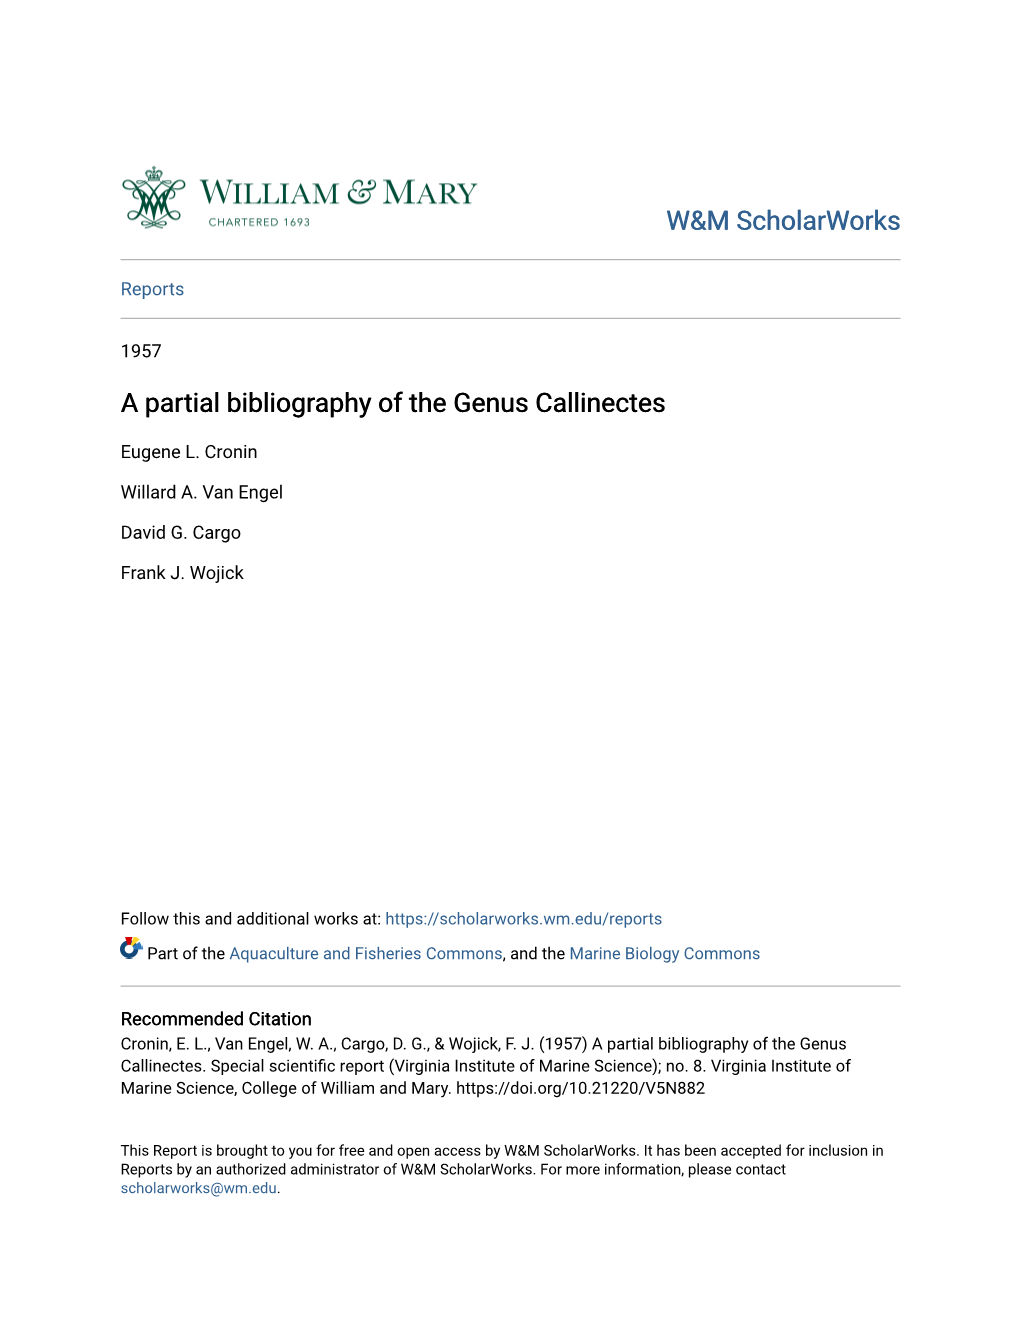 A Partial Bibliography of the Genus Callinectes